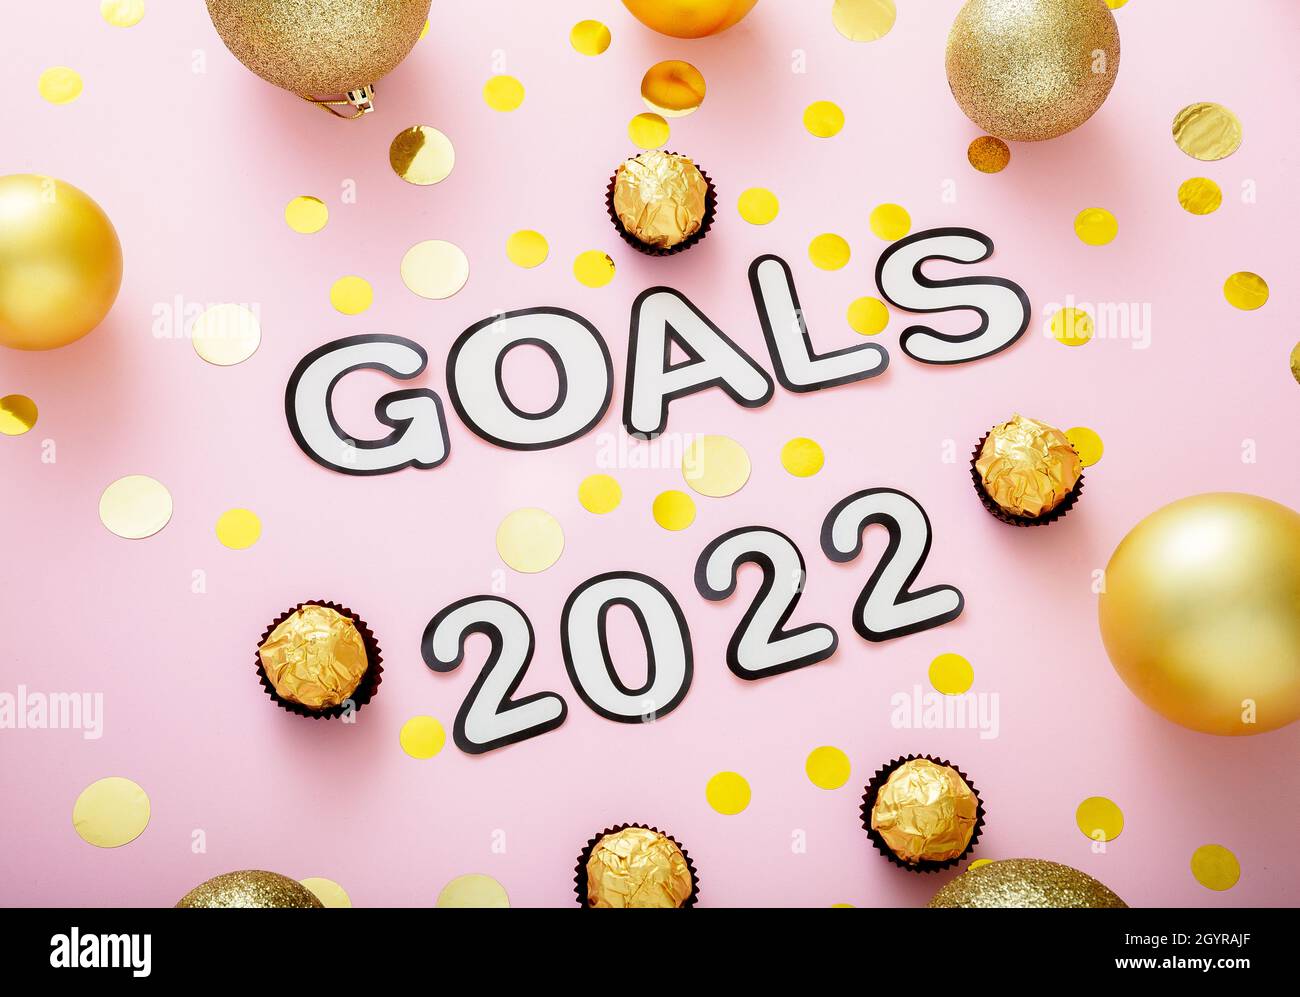 2022 Goals text with Christmas decorations gold confetti on pink color background. Goals 2022 lettering in Happy New Year style Stock Photo